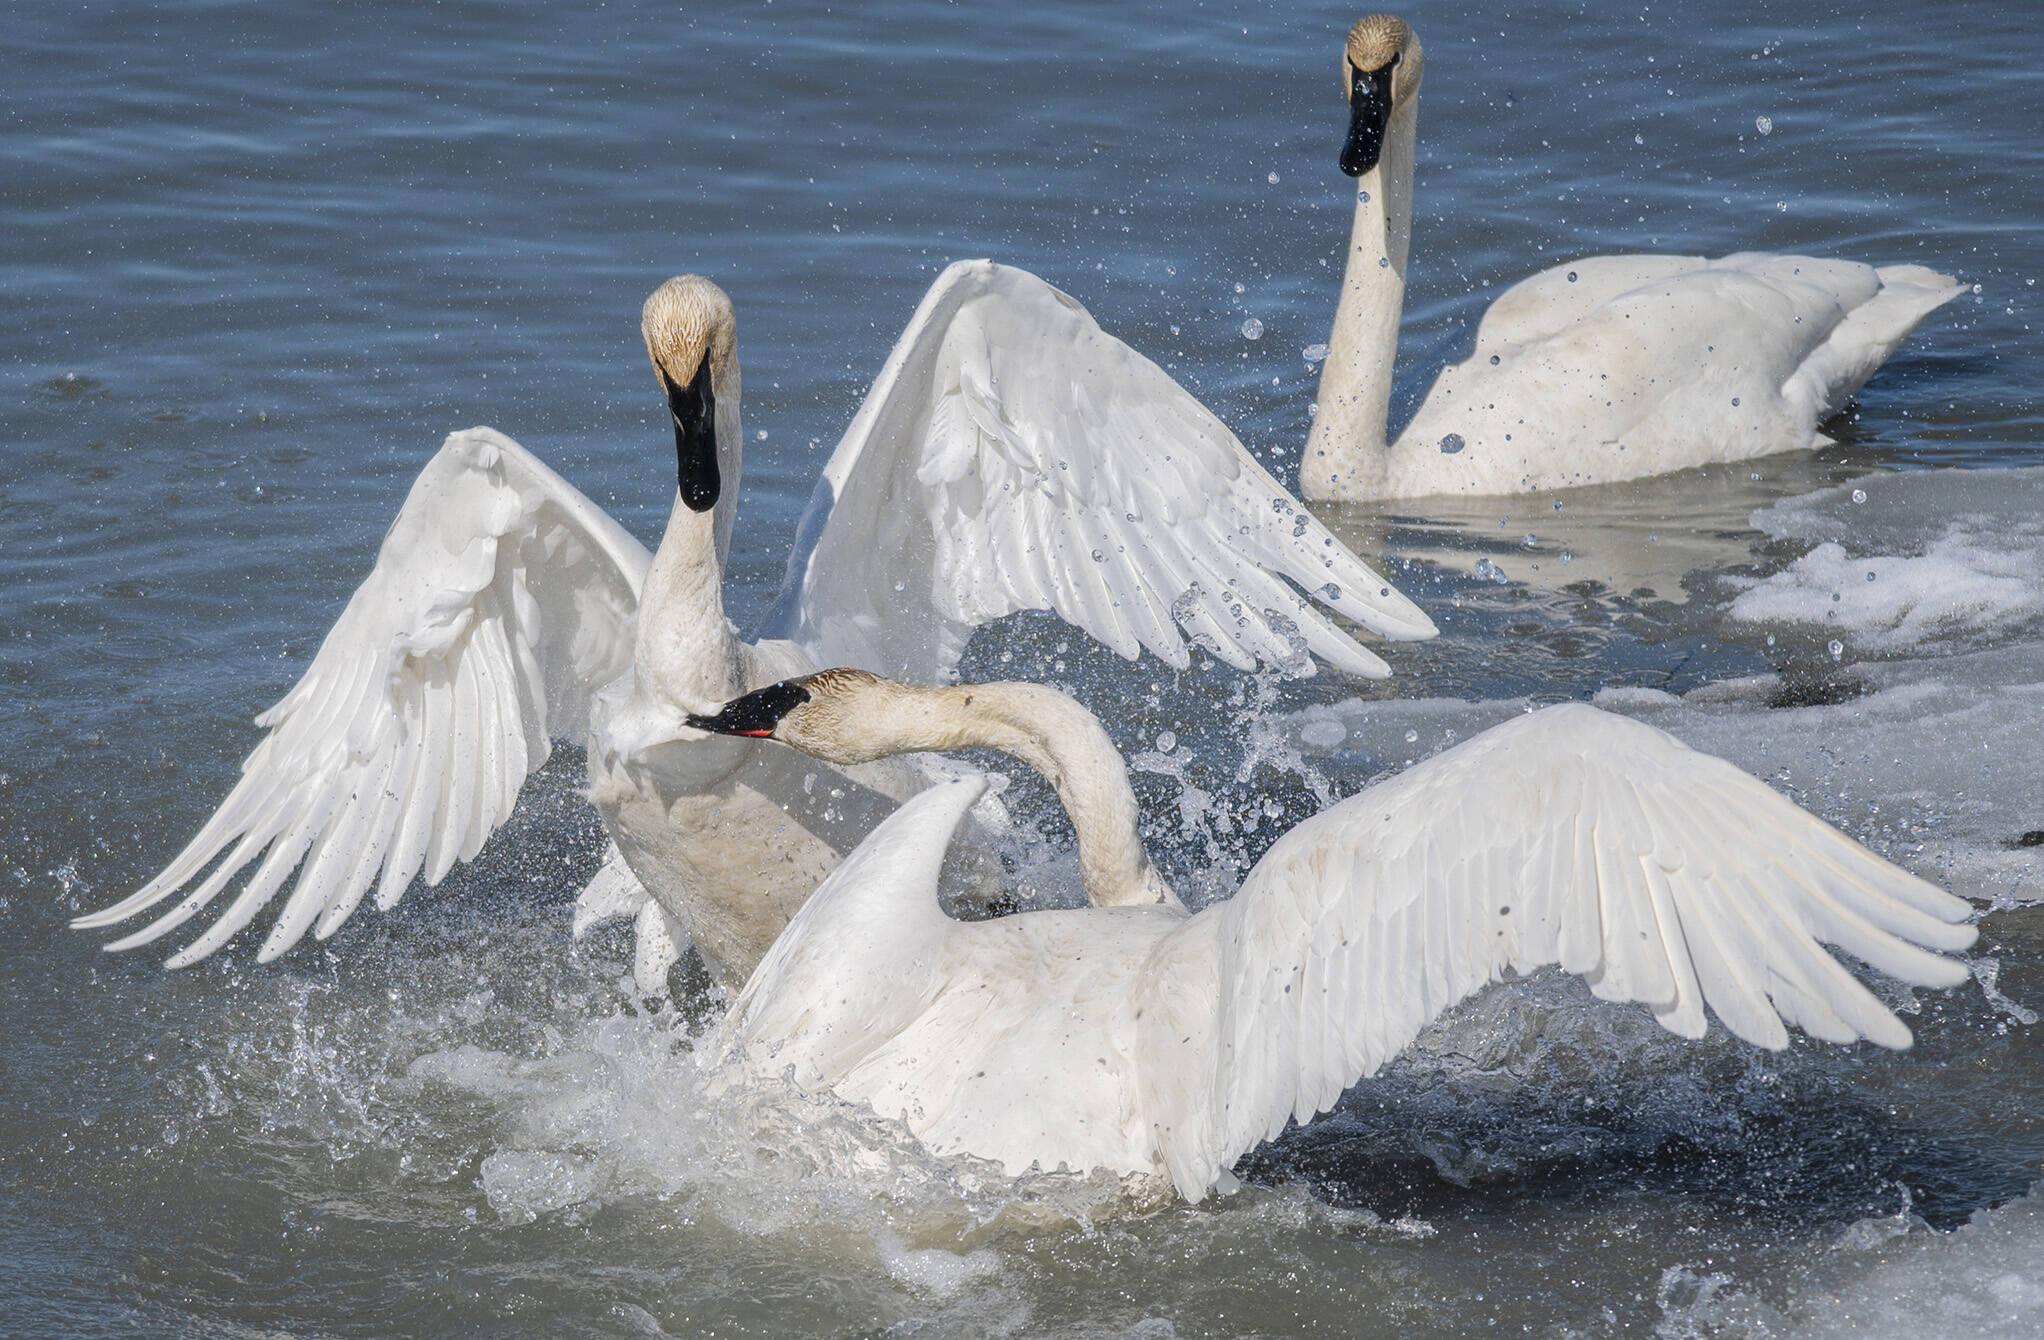 Trumpeter swans get into a tussle on the Tagish River on April 18, 2021. (Mike Thomas/Submitted)